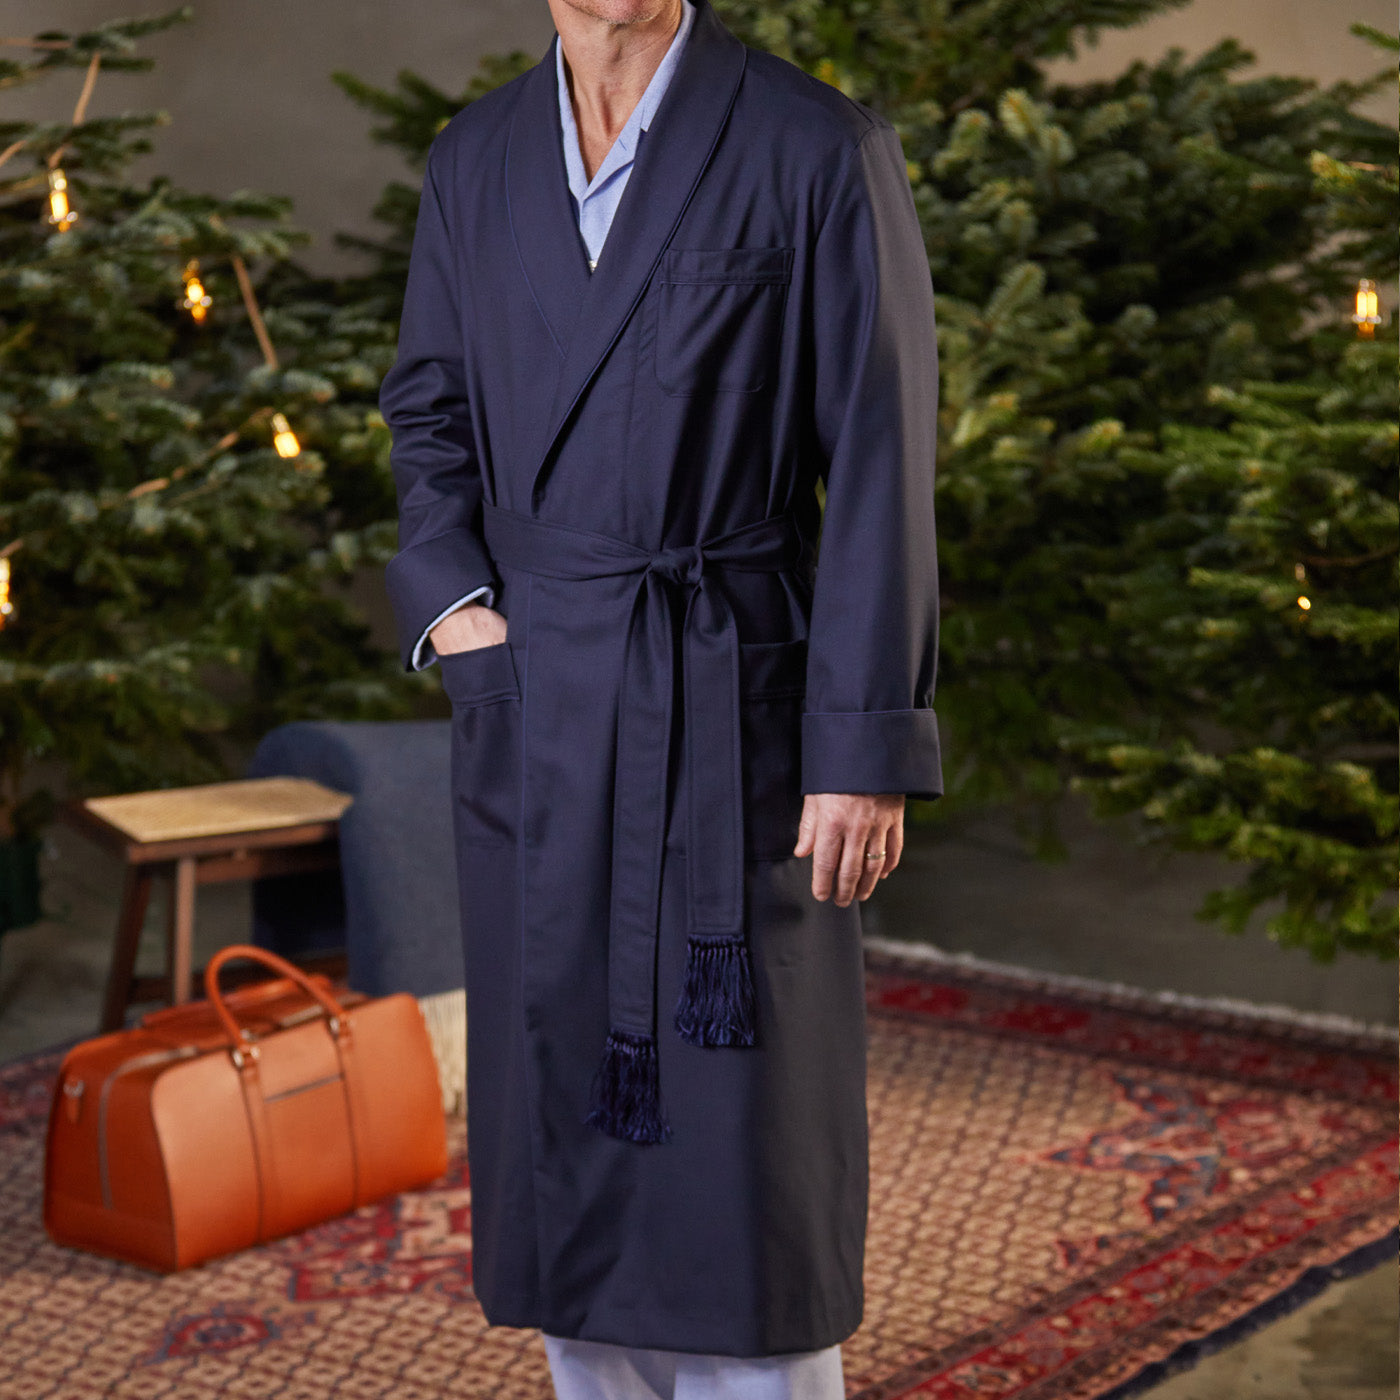 Dressing Gown V. Bathrobe: What's the Difference? - He Spoke Style